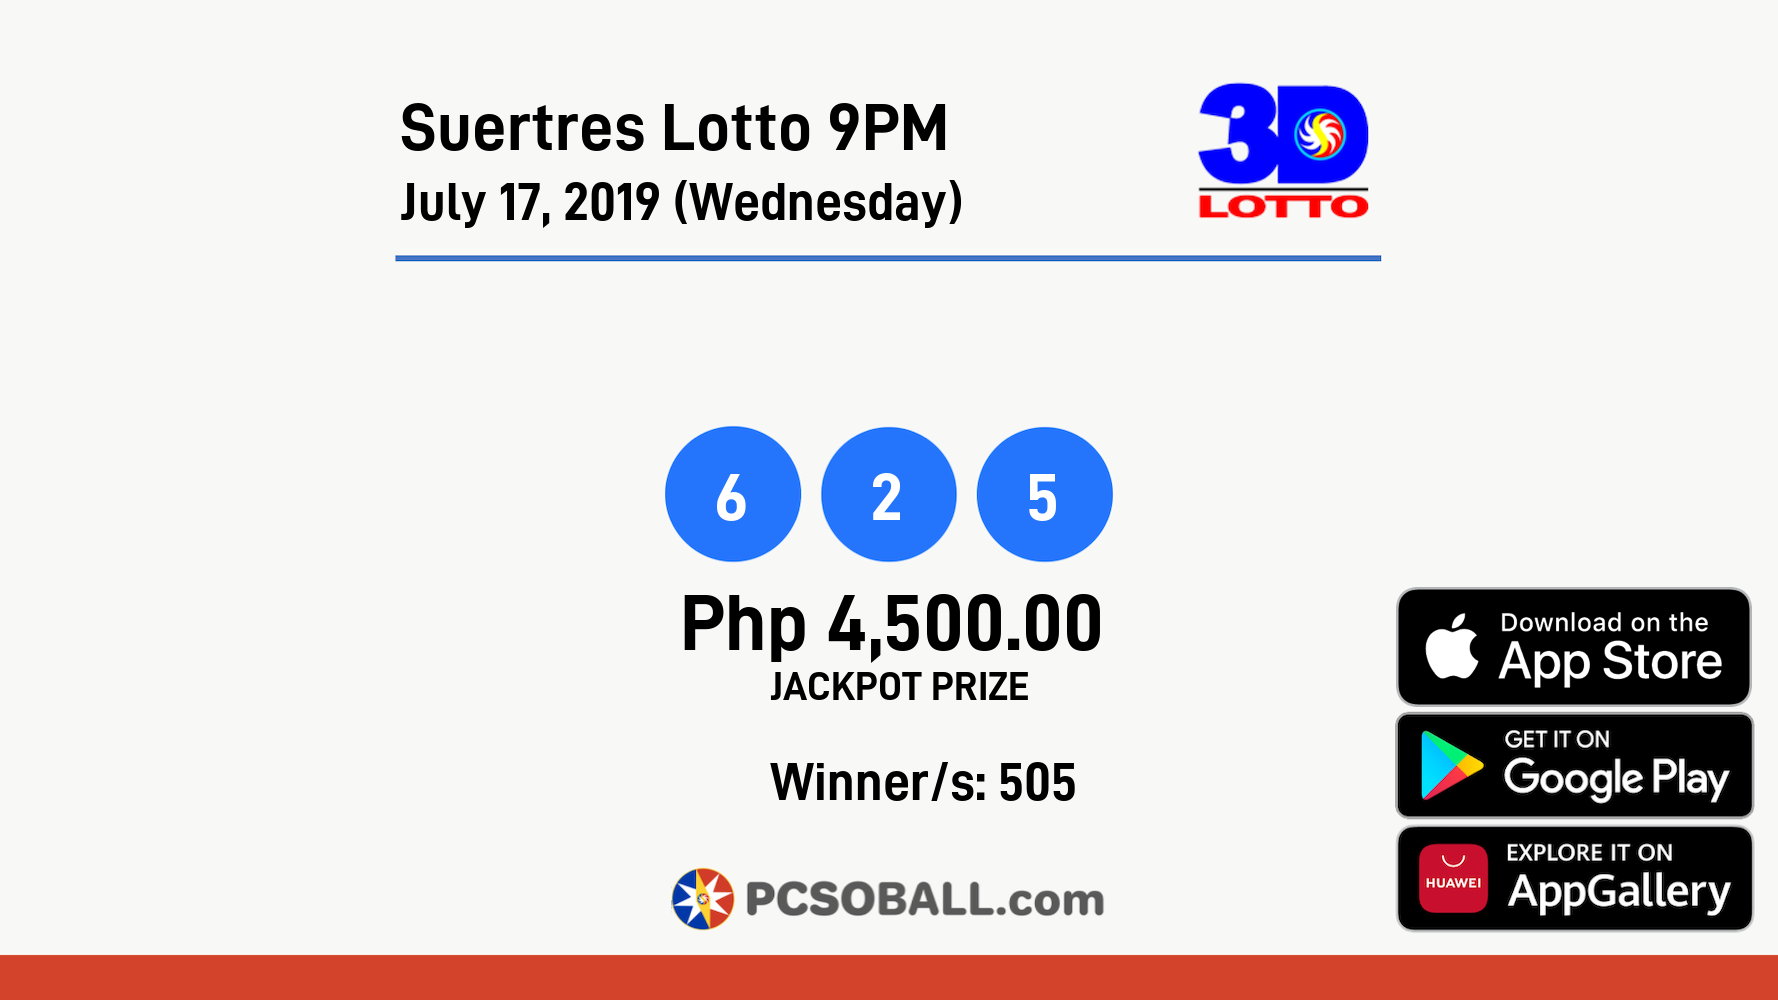 Suertres Lotto 9PM July 17, 2019 (Wednesday) Result